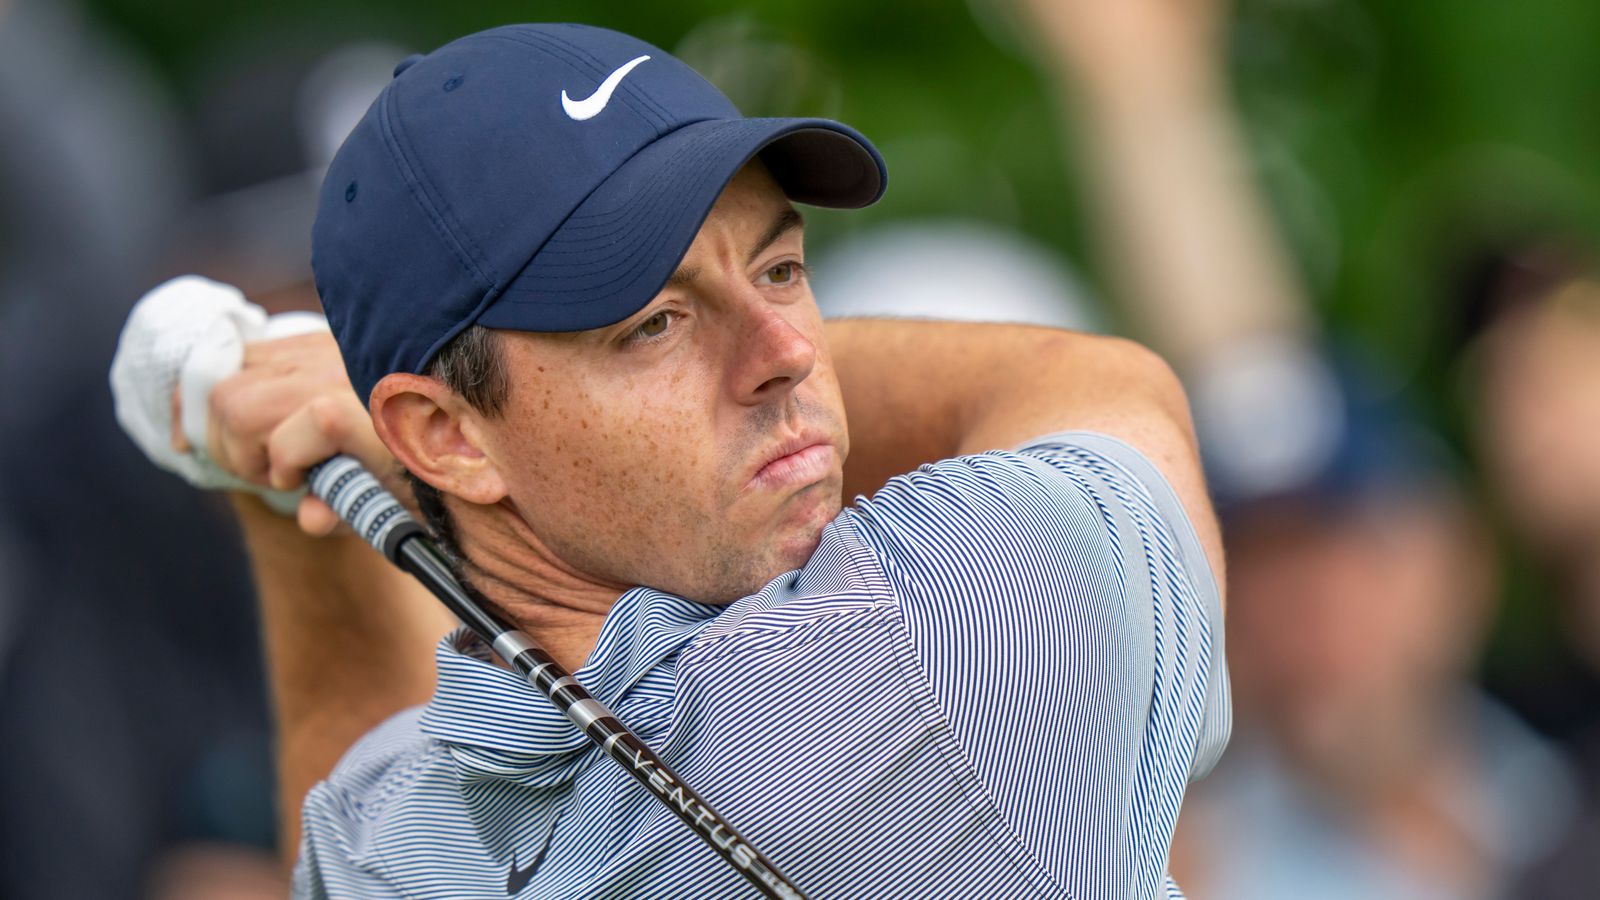 The 150th Open: Rory McIlroy tipped for title by Gary Player, while Tiger Woods ‘could be a force’